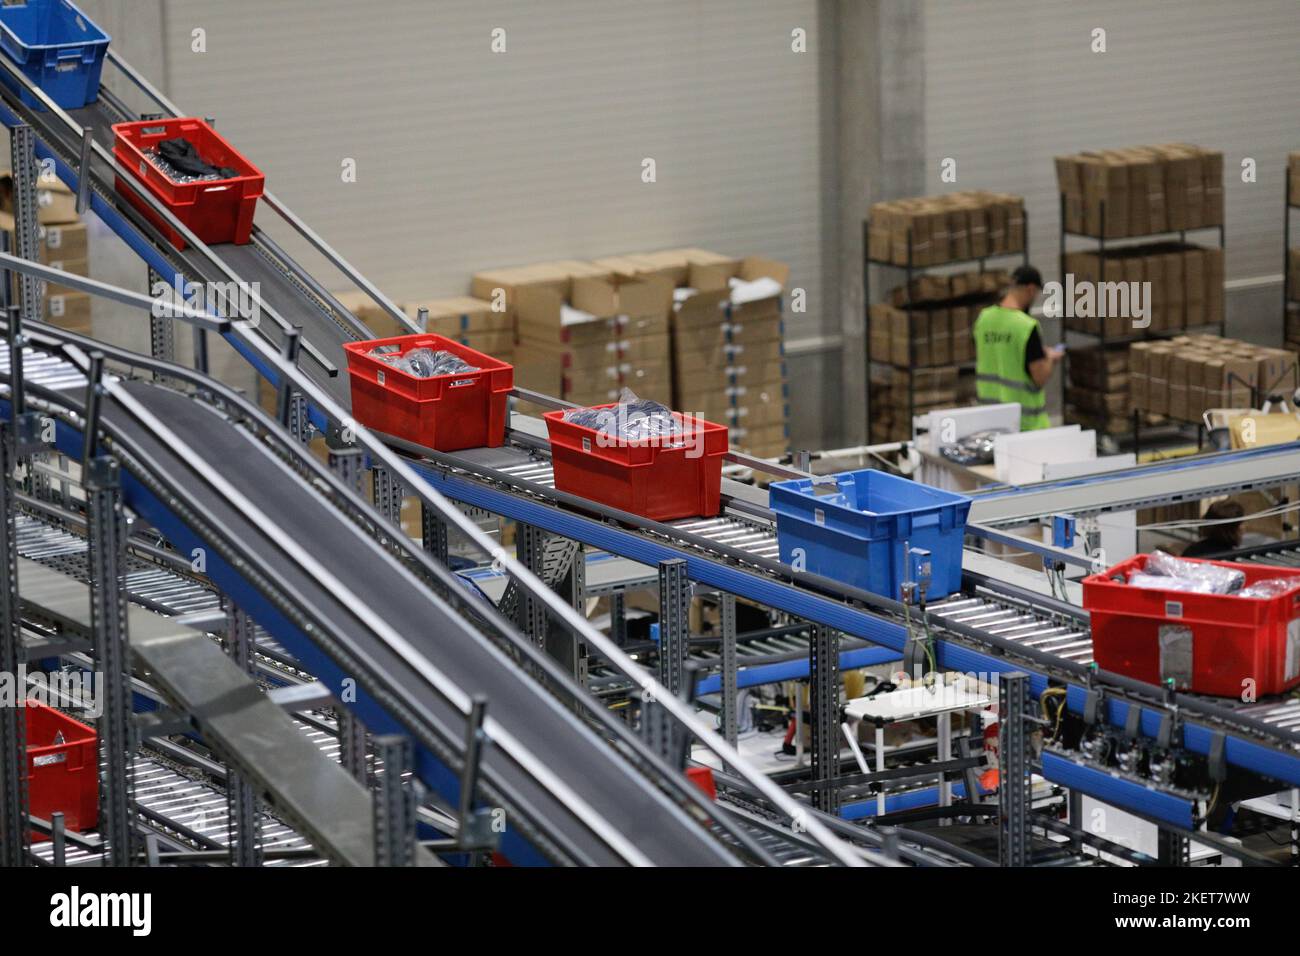 Bucharest, Romania - November 7, 2022: Boxes with products on a conveyor belt in an e-commerce and delivery company. Stock Photo